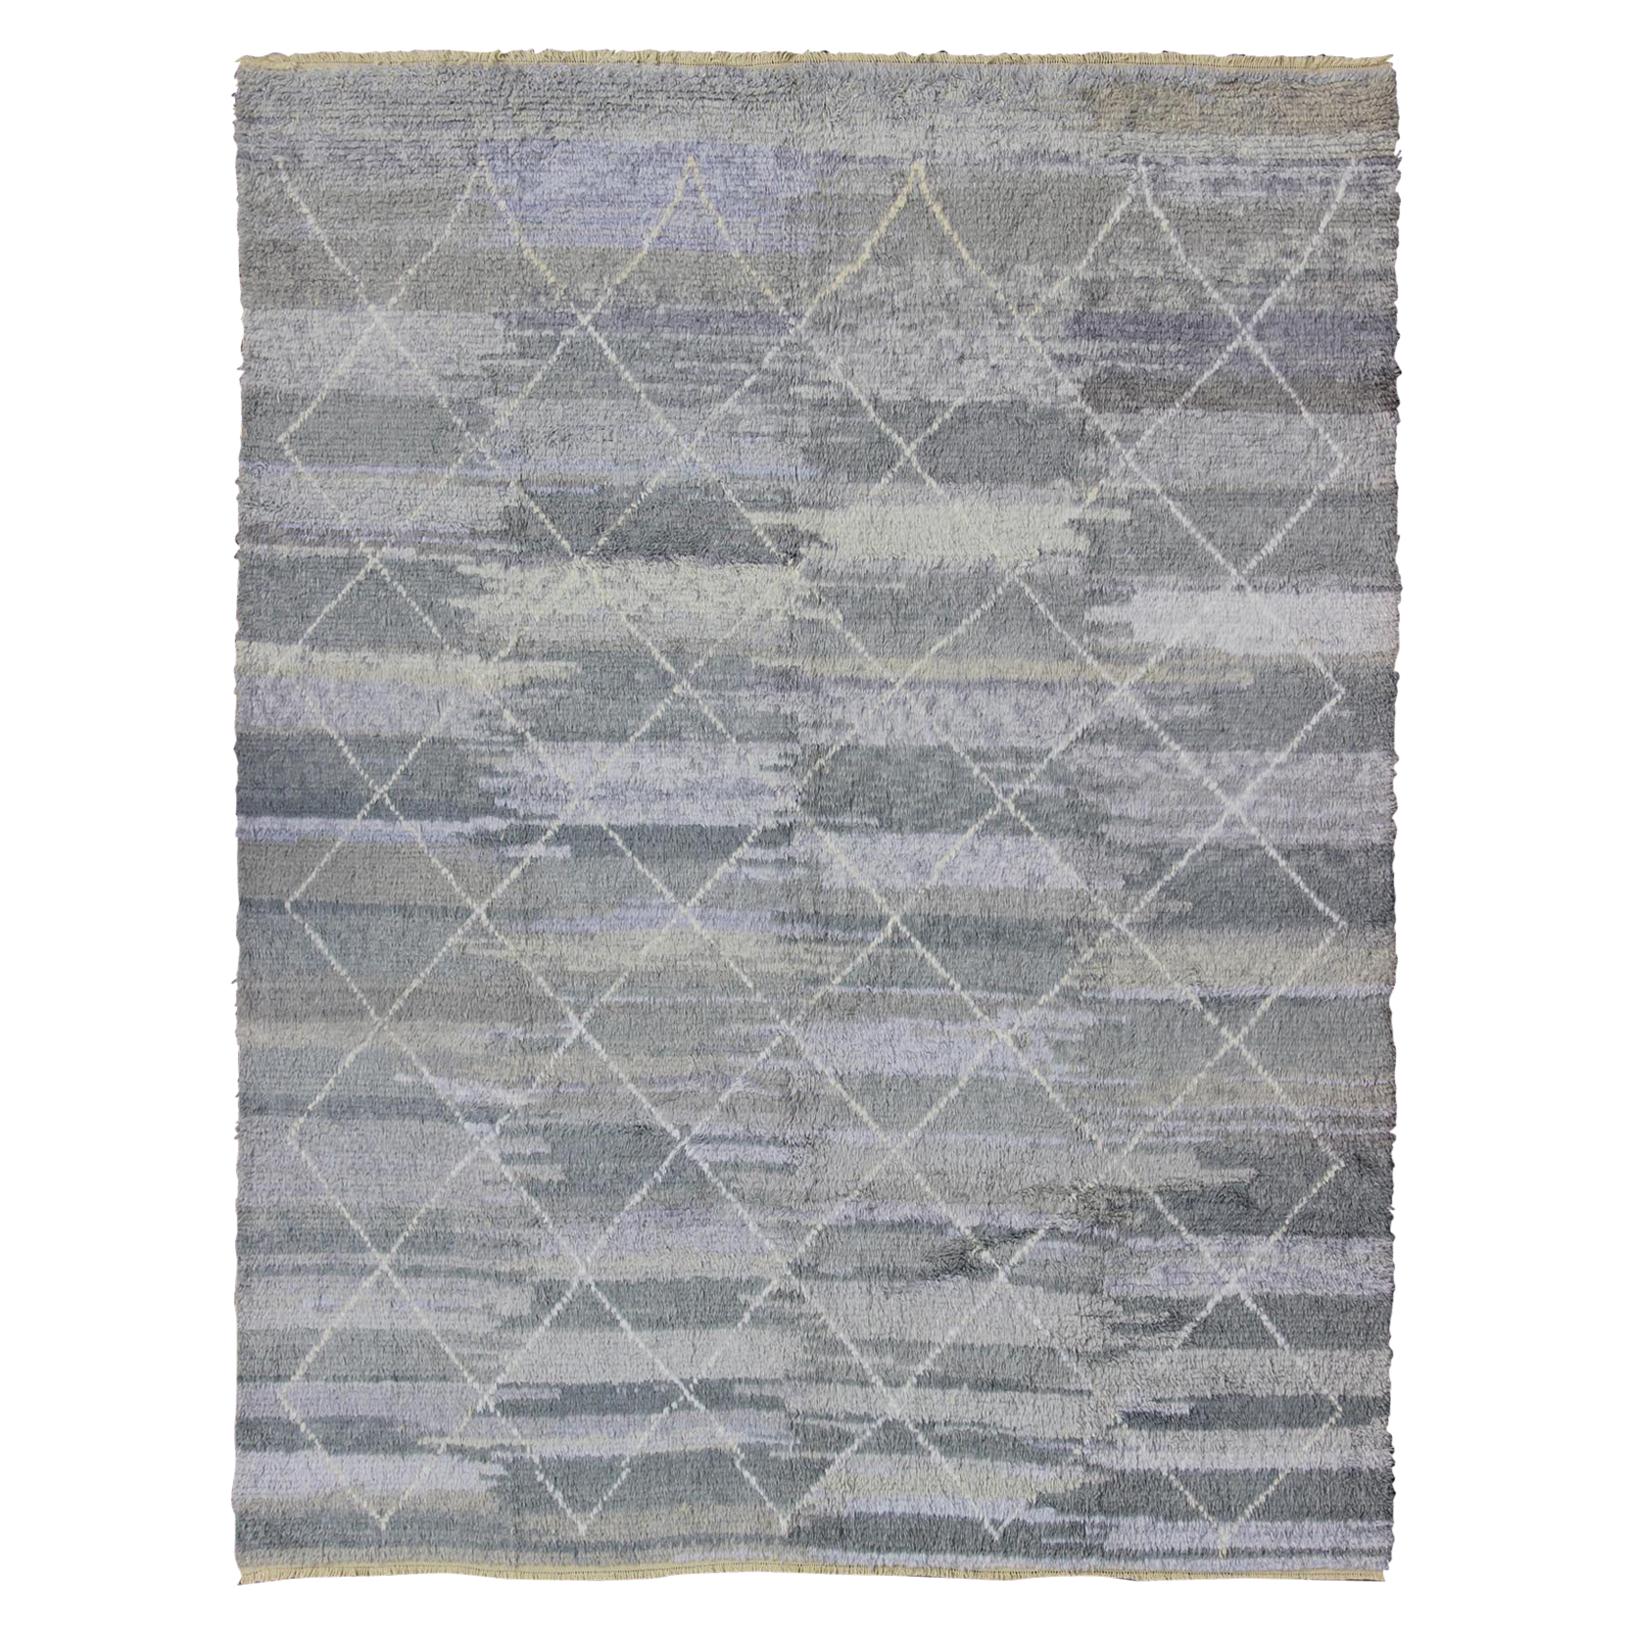 Modern Moroccan Rug with All-Over Lattice Design in Grey Tones